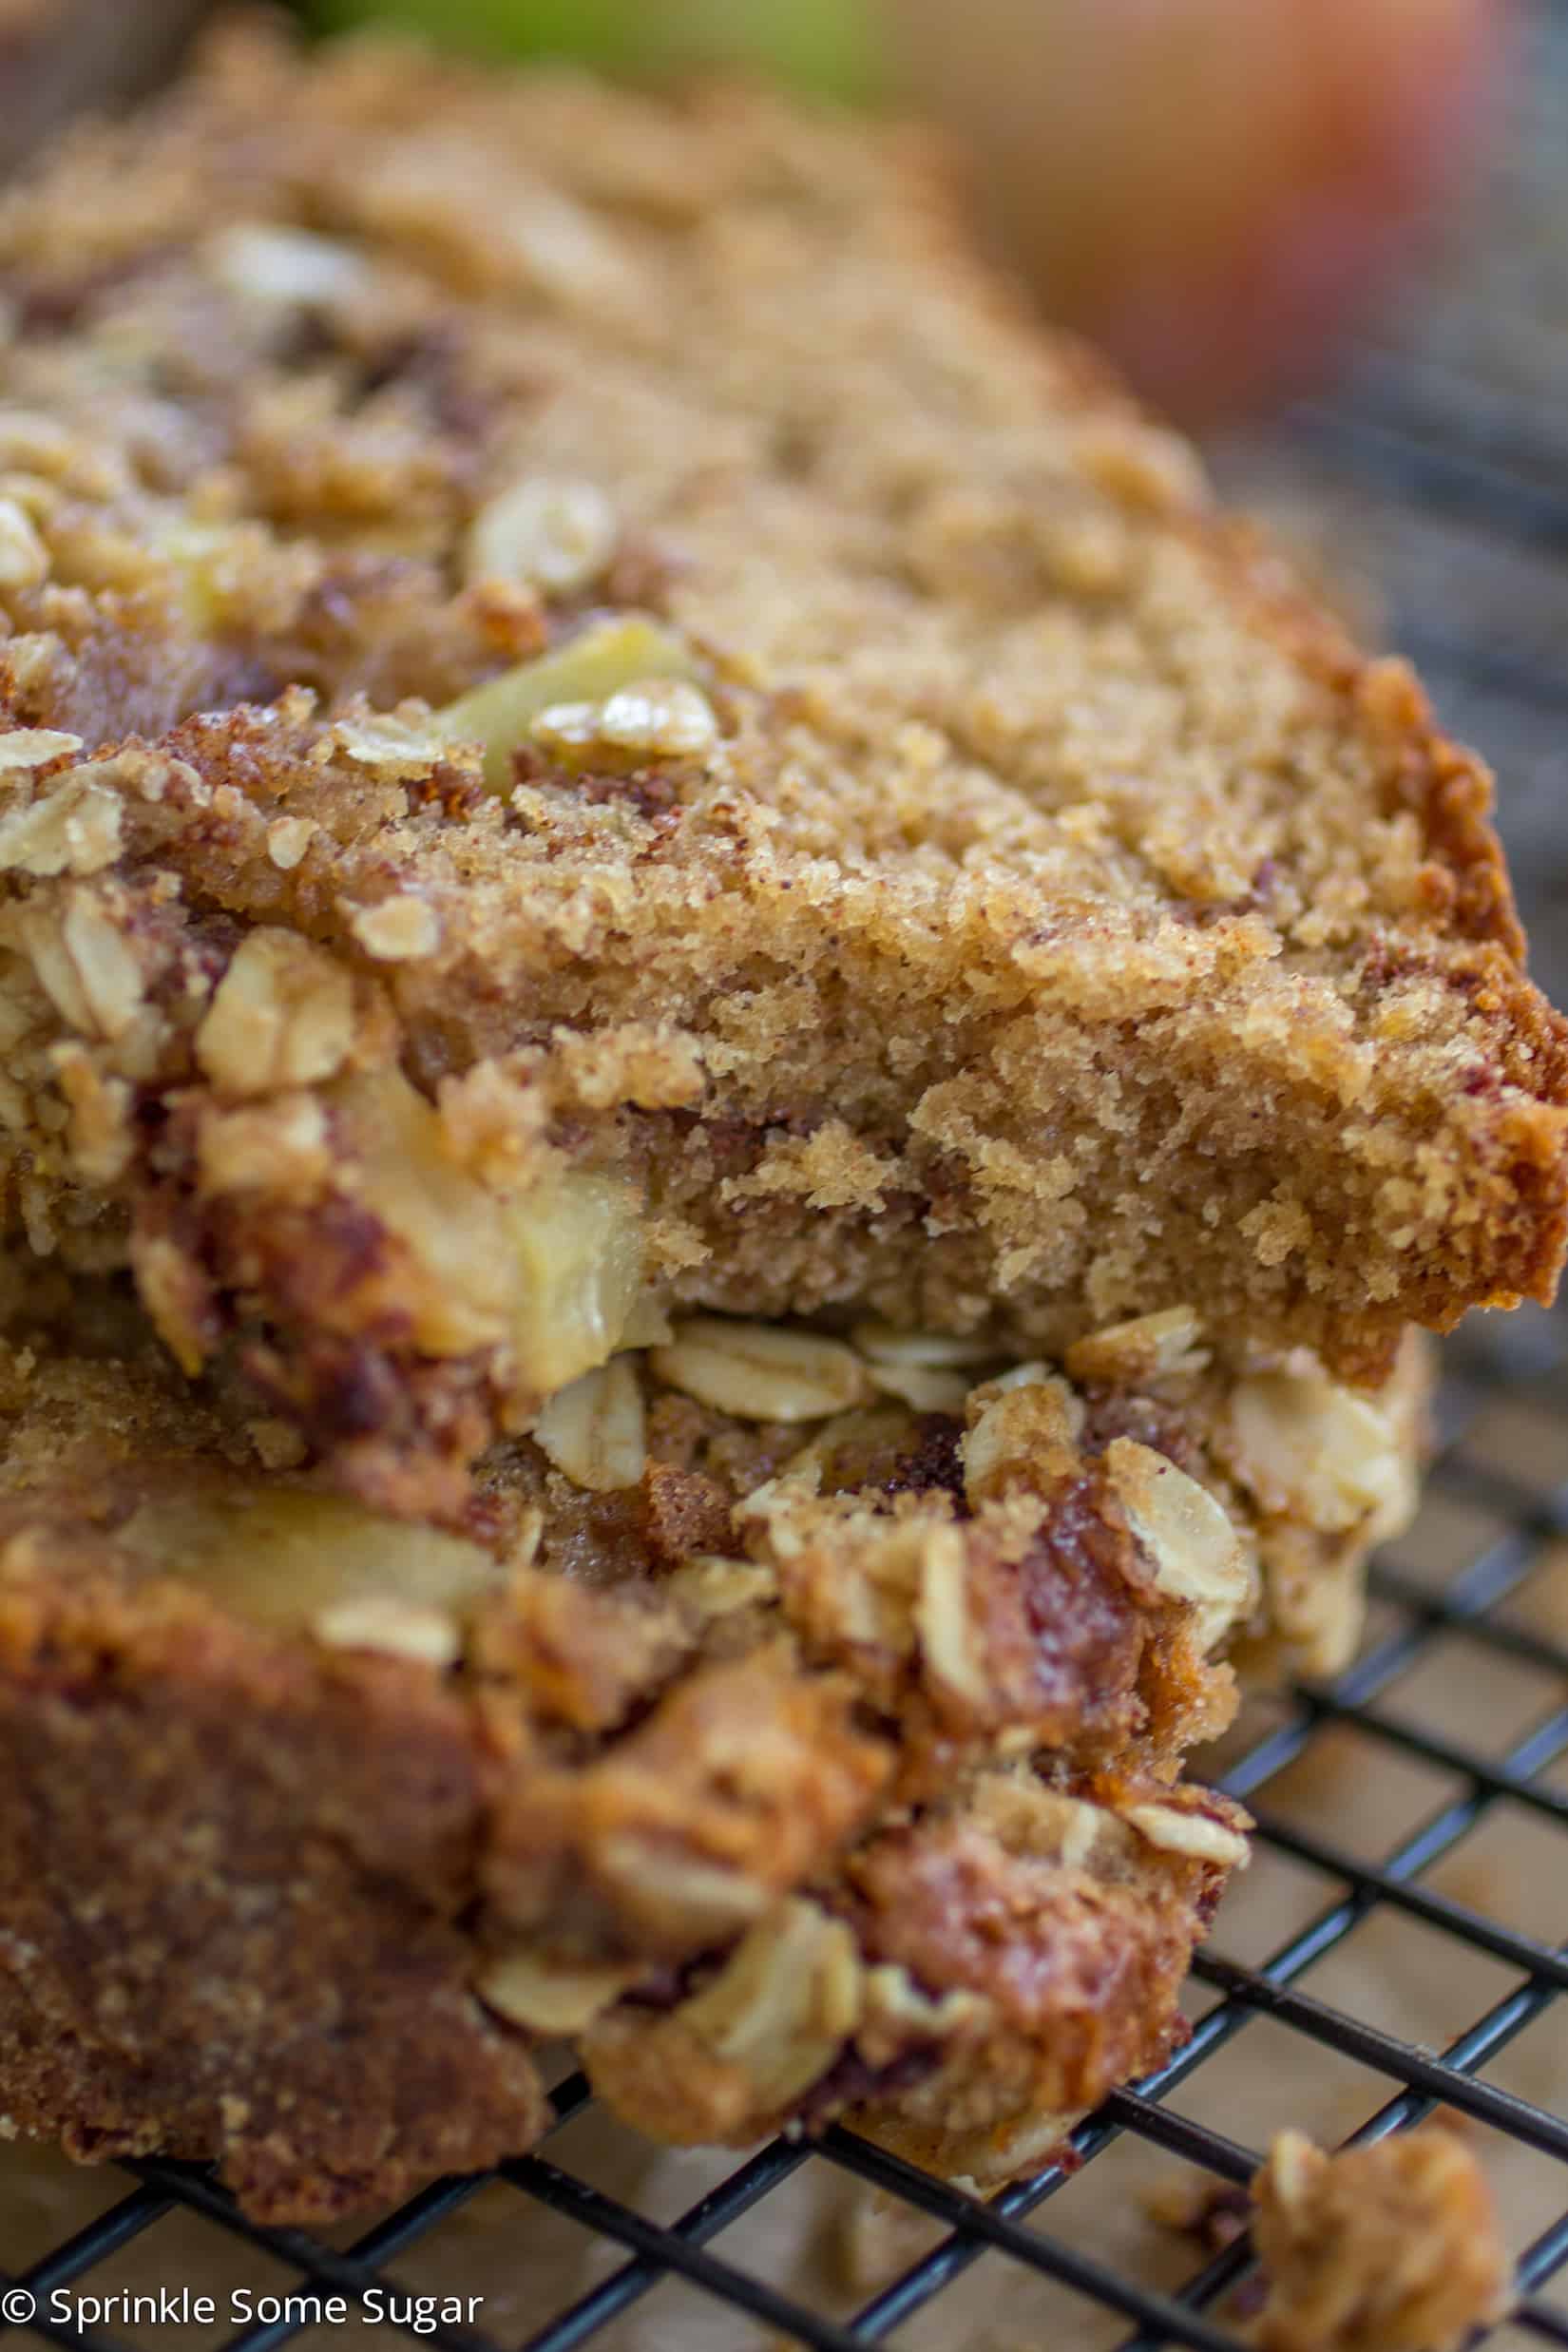 Apple Cinnamon Streusel Bread slices stacked on top of each other with a bite taken out of the top slice.